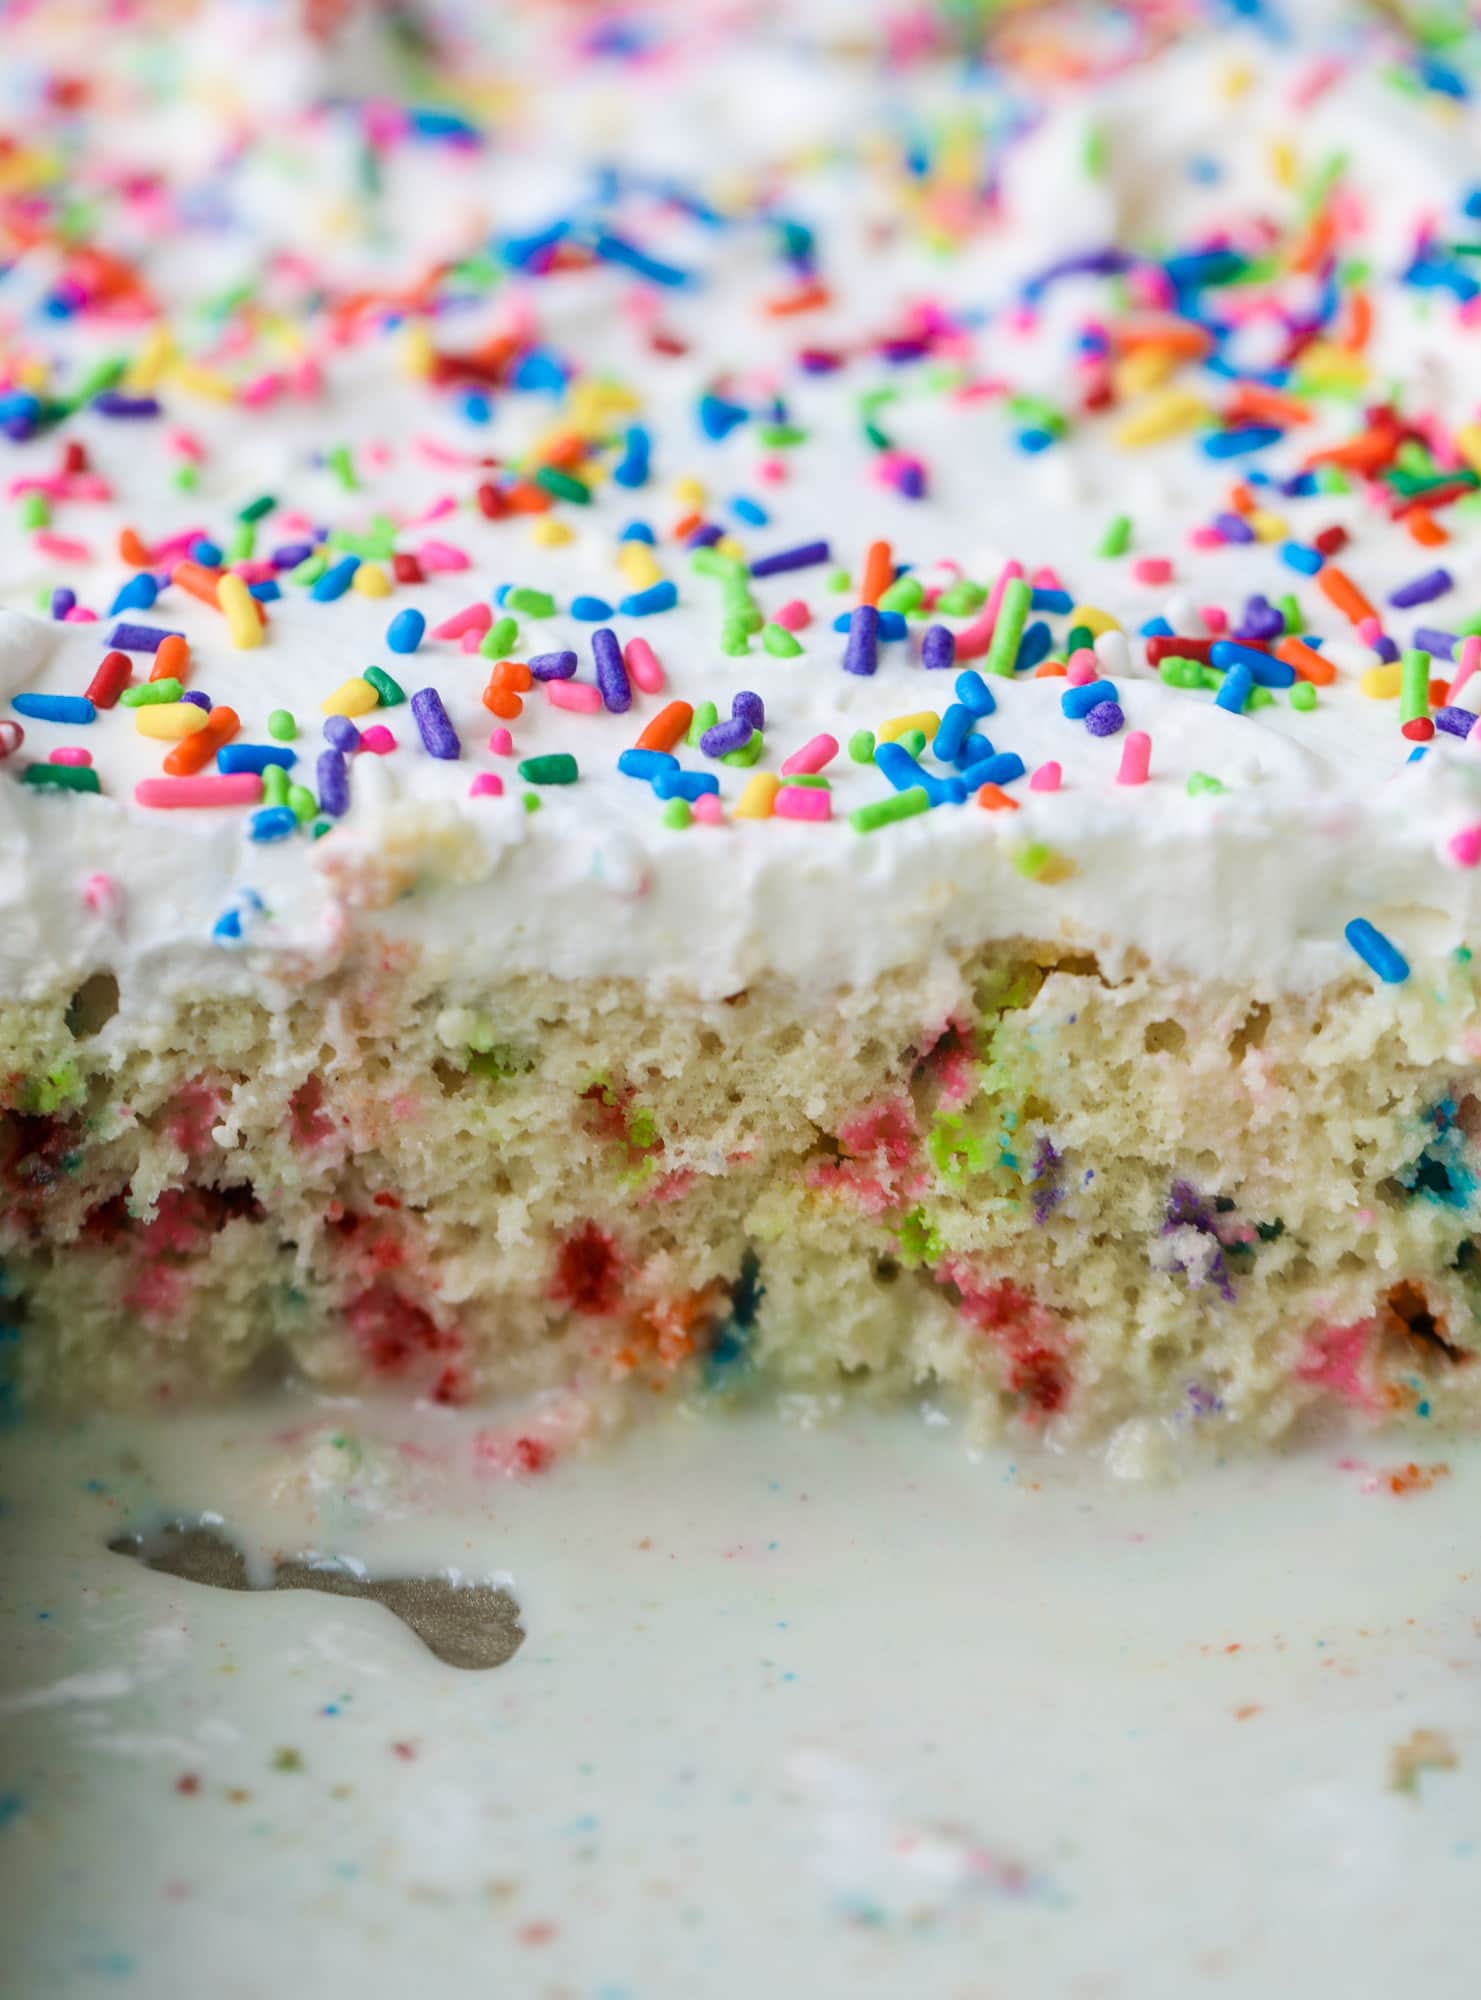 A sprinkled twist on the classic tres leches! Tres leches confetti cake is full of rainbow sprinkles and tastes like heaven. So easy to make!